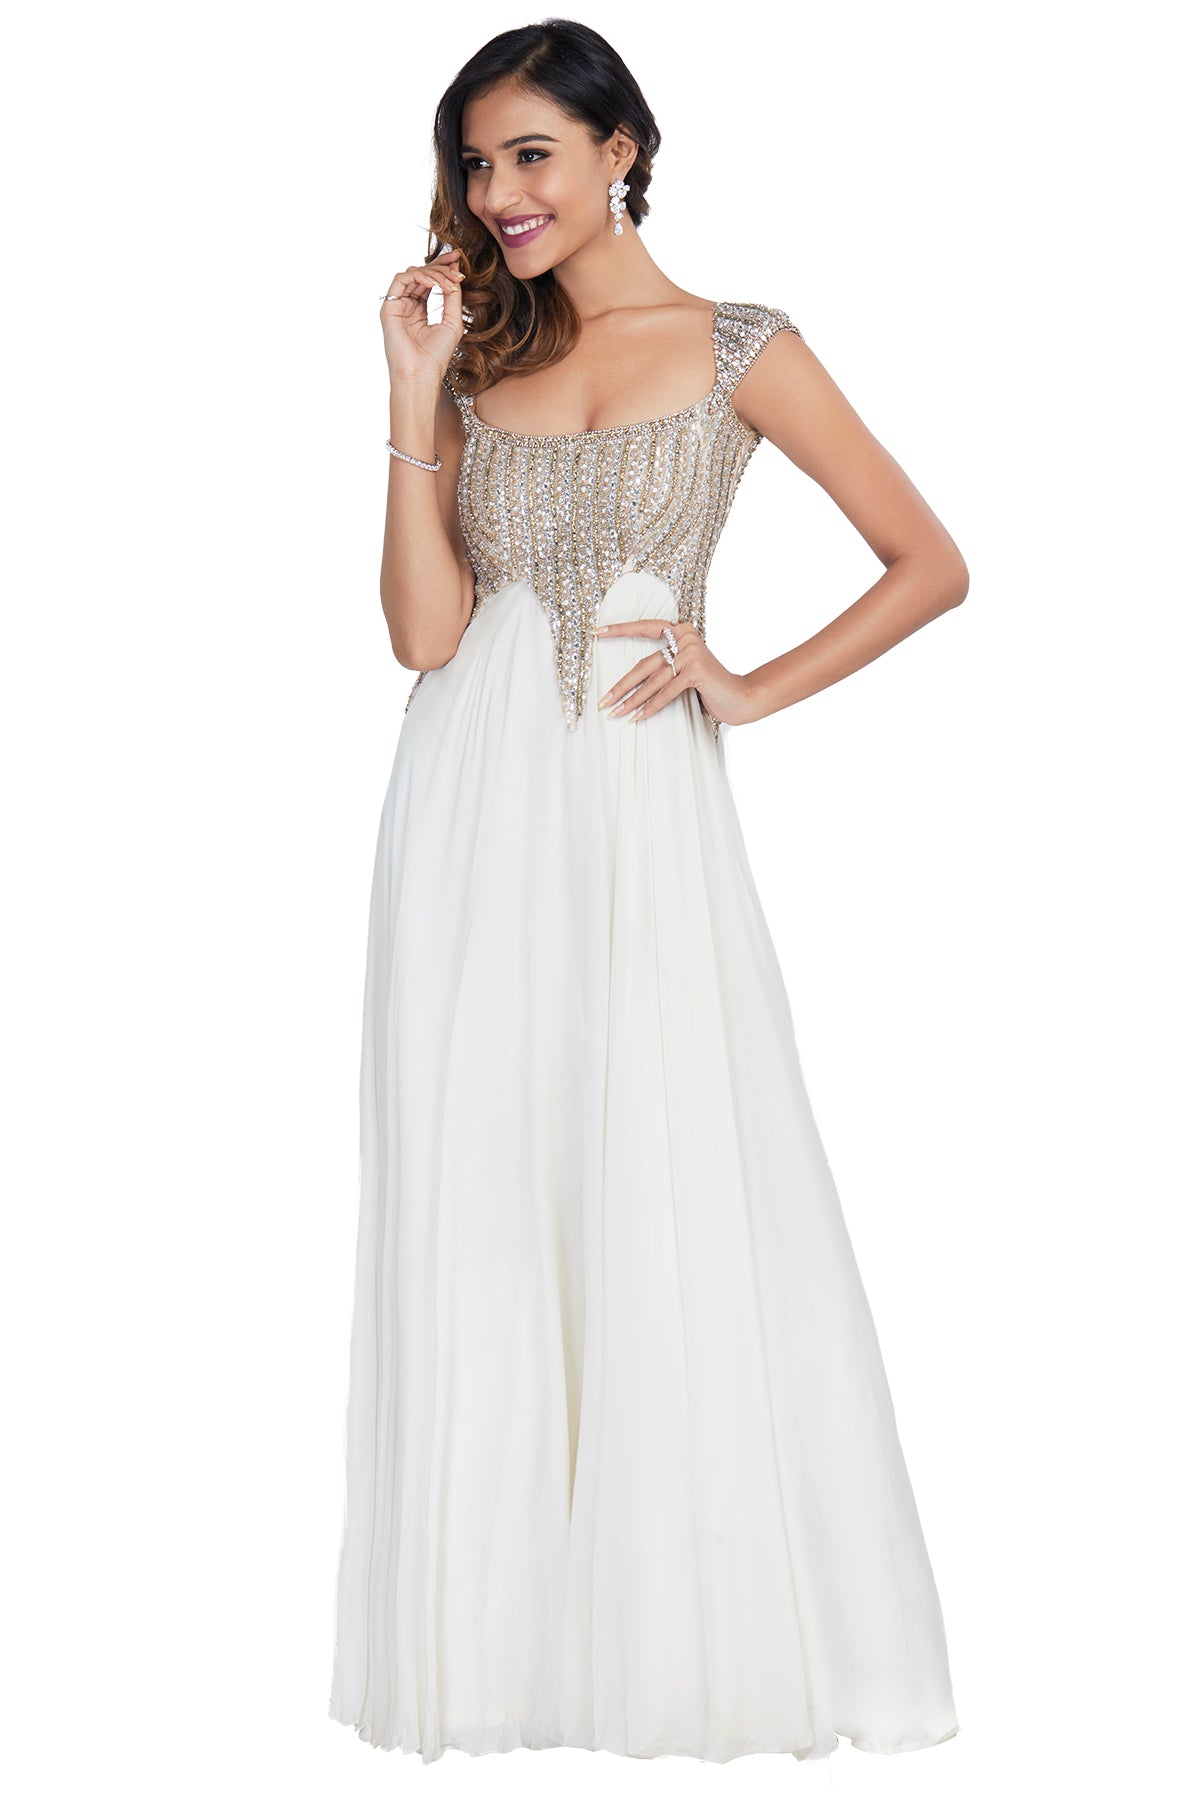 Embellished white gown